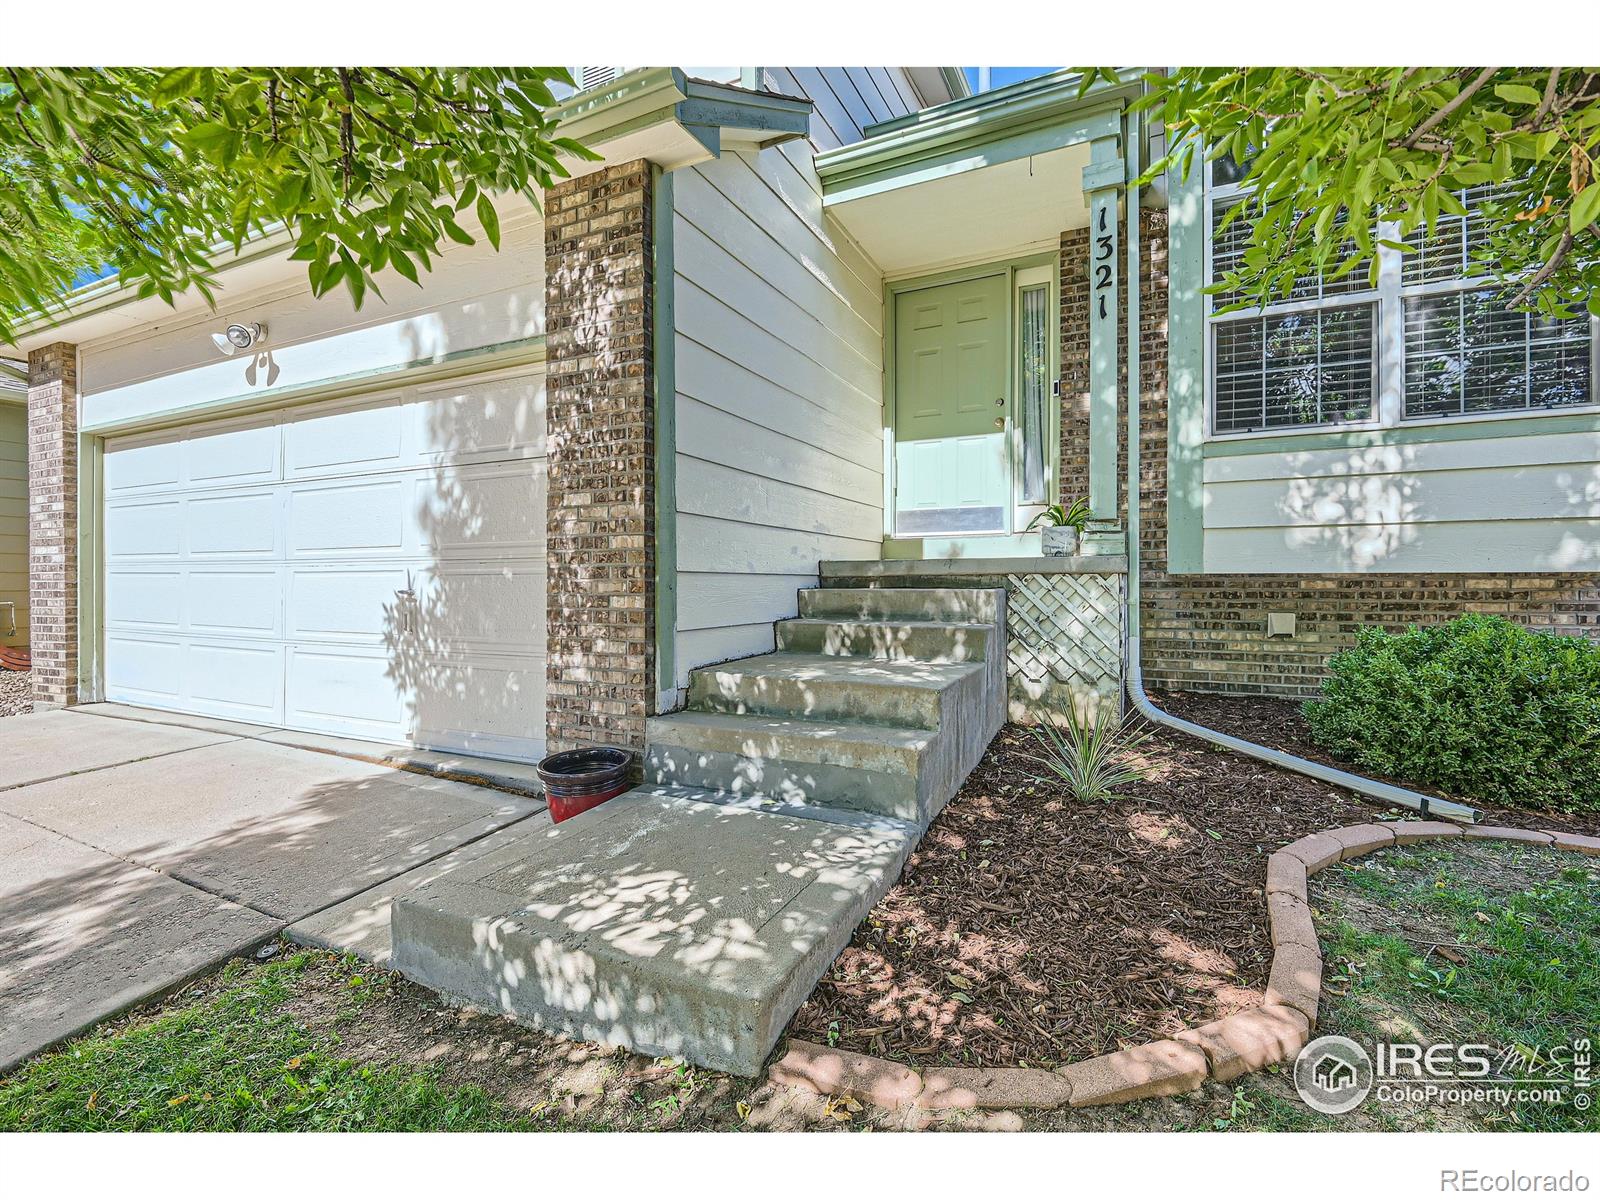 Report Image for 1321 W 132nd Place,Westminster, Colorado